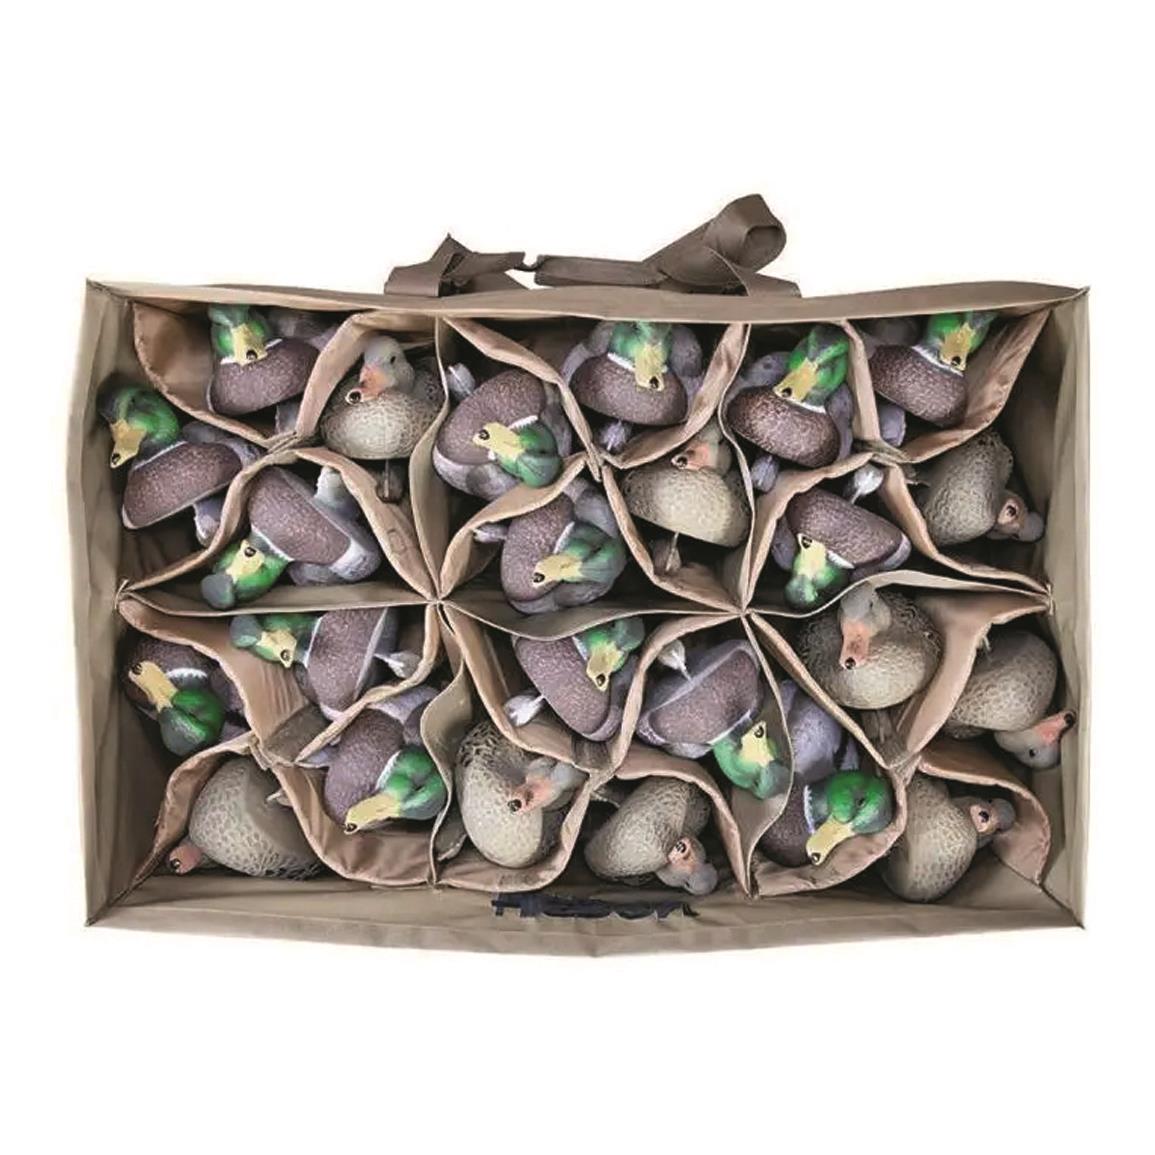 Padded divider panels protect your decoys and add buoyancy